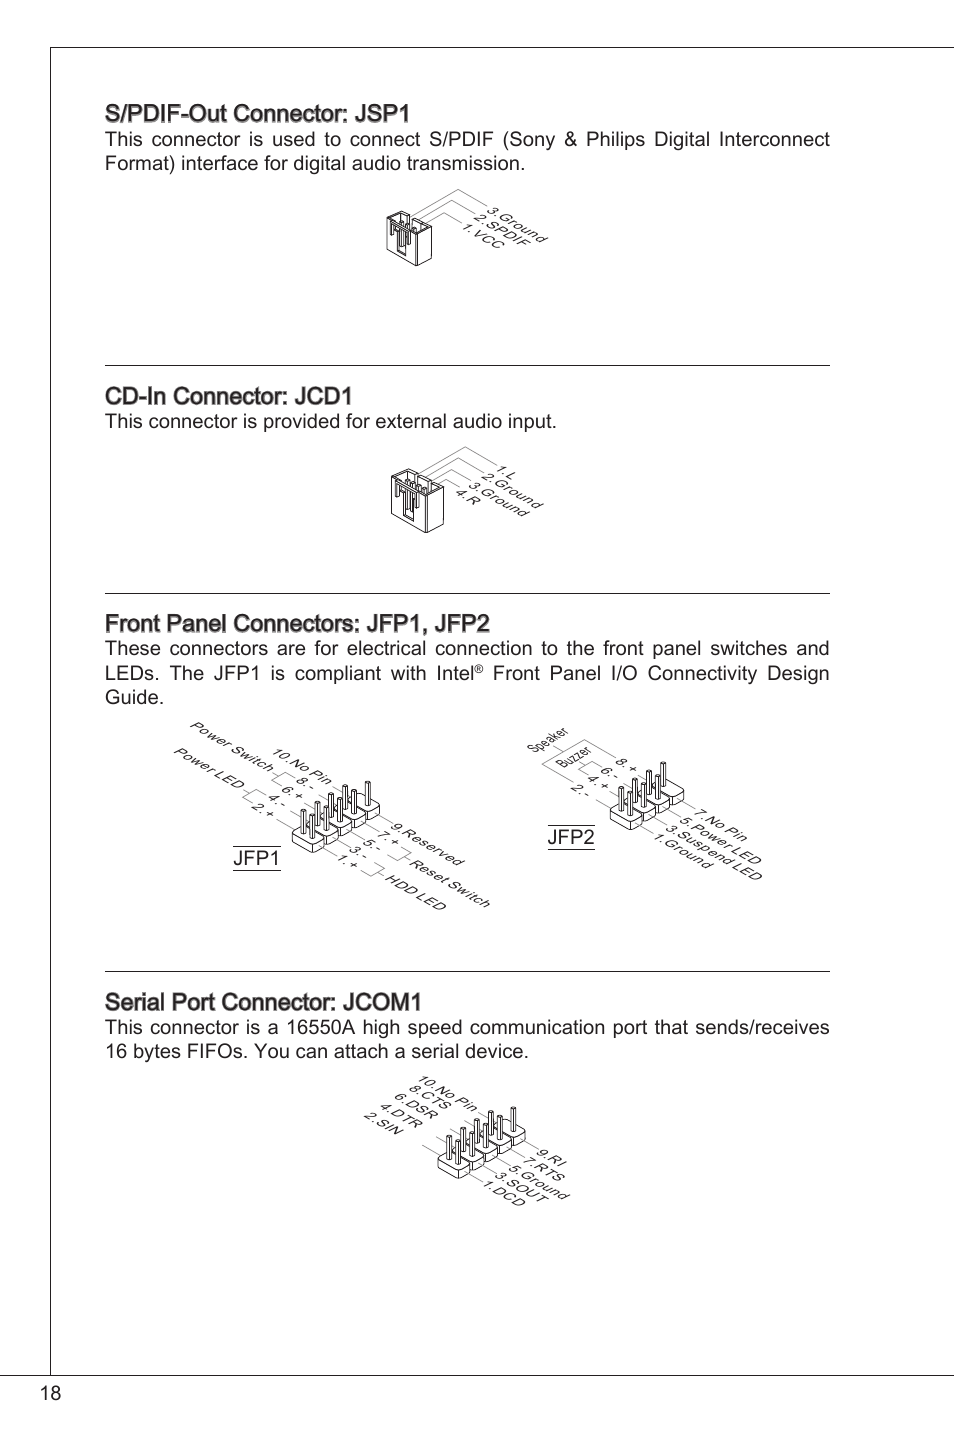 S/pdif-out connector: jsp, Cd-in connector: jcd, Front panel connectors:  jfp , jfp2 | MSI G41M-P26 User Manual | Page 18 / 155